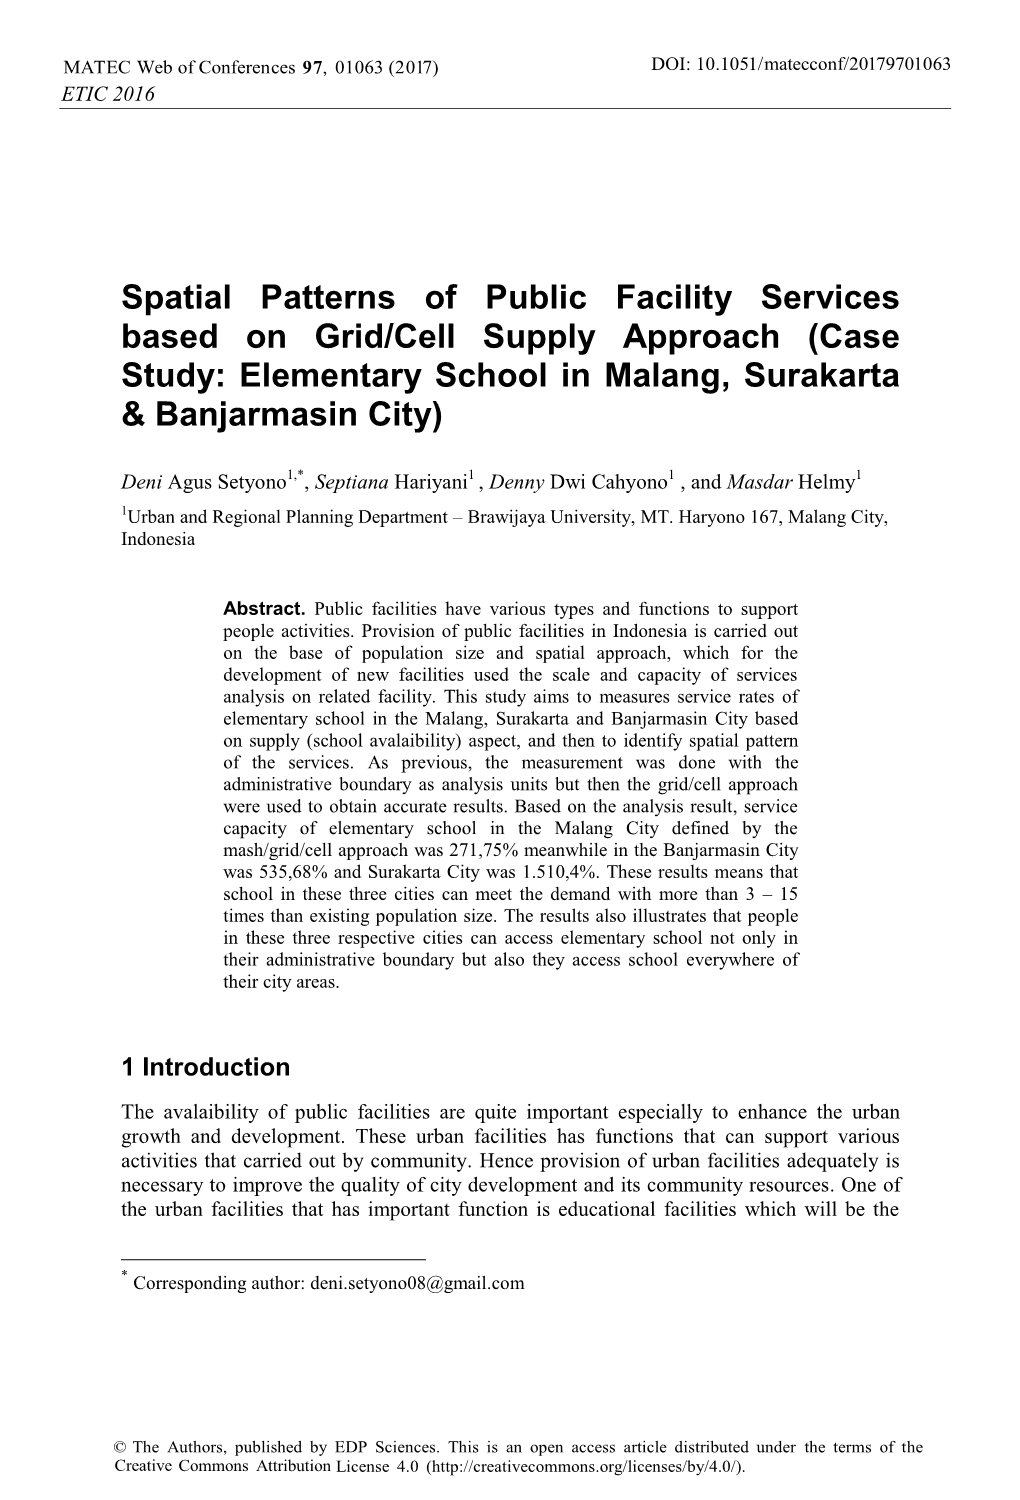 Spatial Patterns of Public Facility Services Based on Grid/Cell Supply Approach (Case Study: Elementary School in Malang, Surakarta & Banjarmasin City)